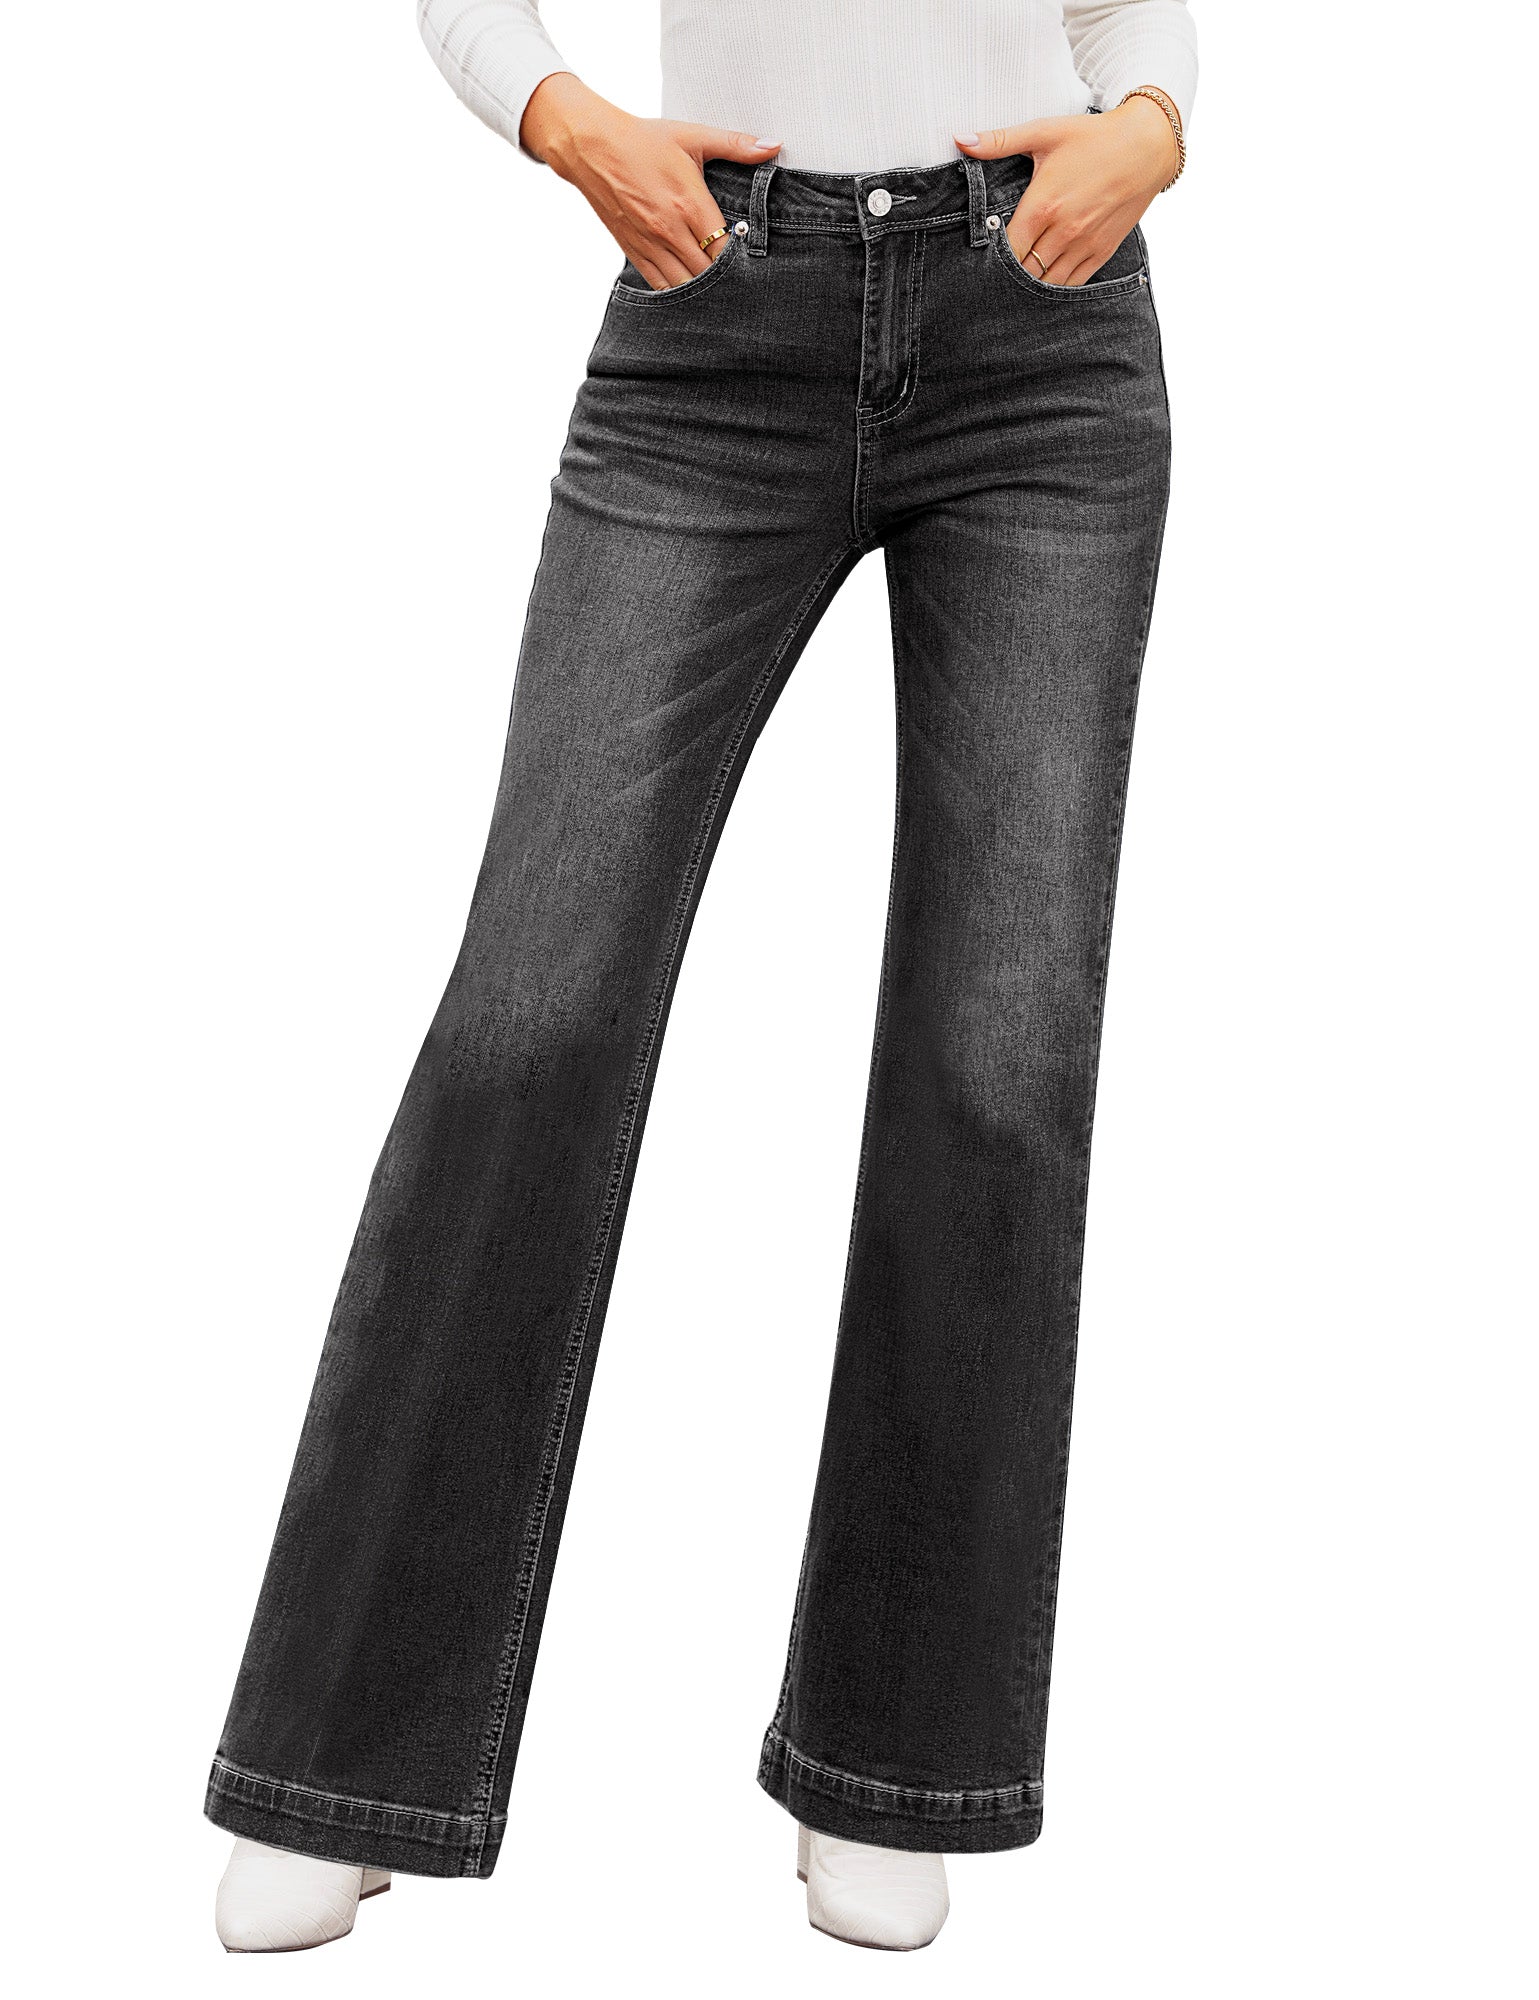 Women's Skinny Ripped Bell Bottom Jeans High Waisted Flare Jeans Black S